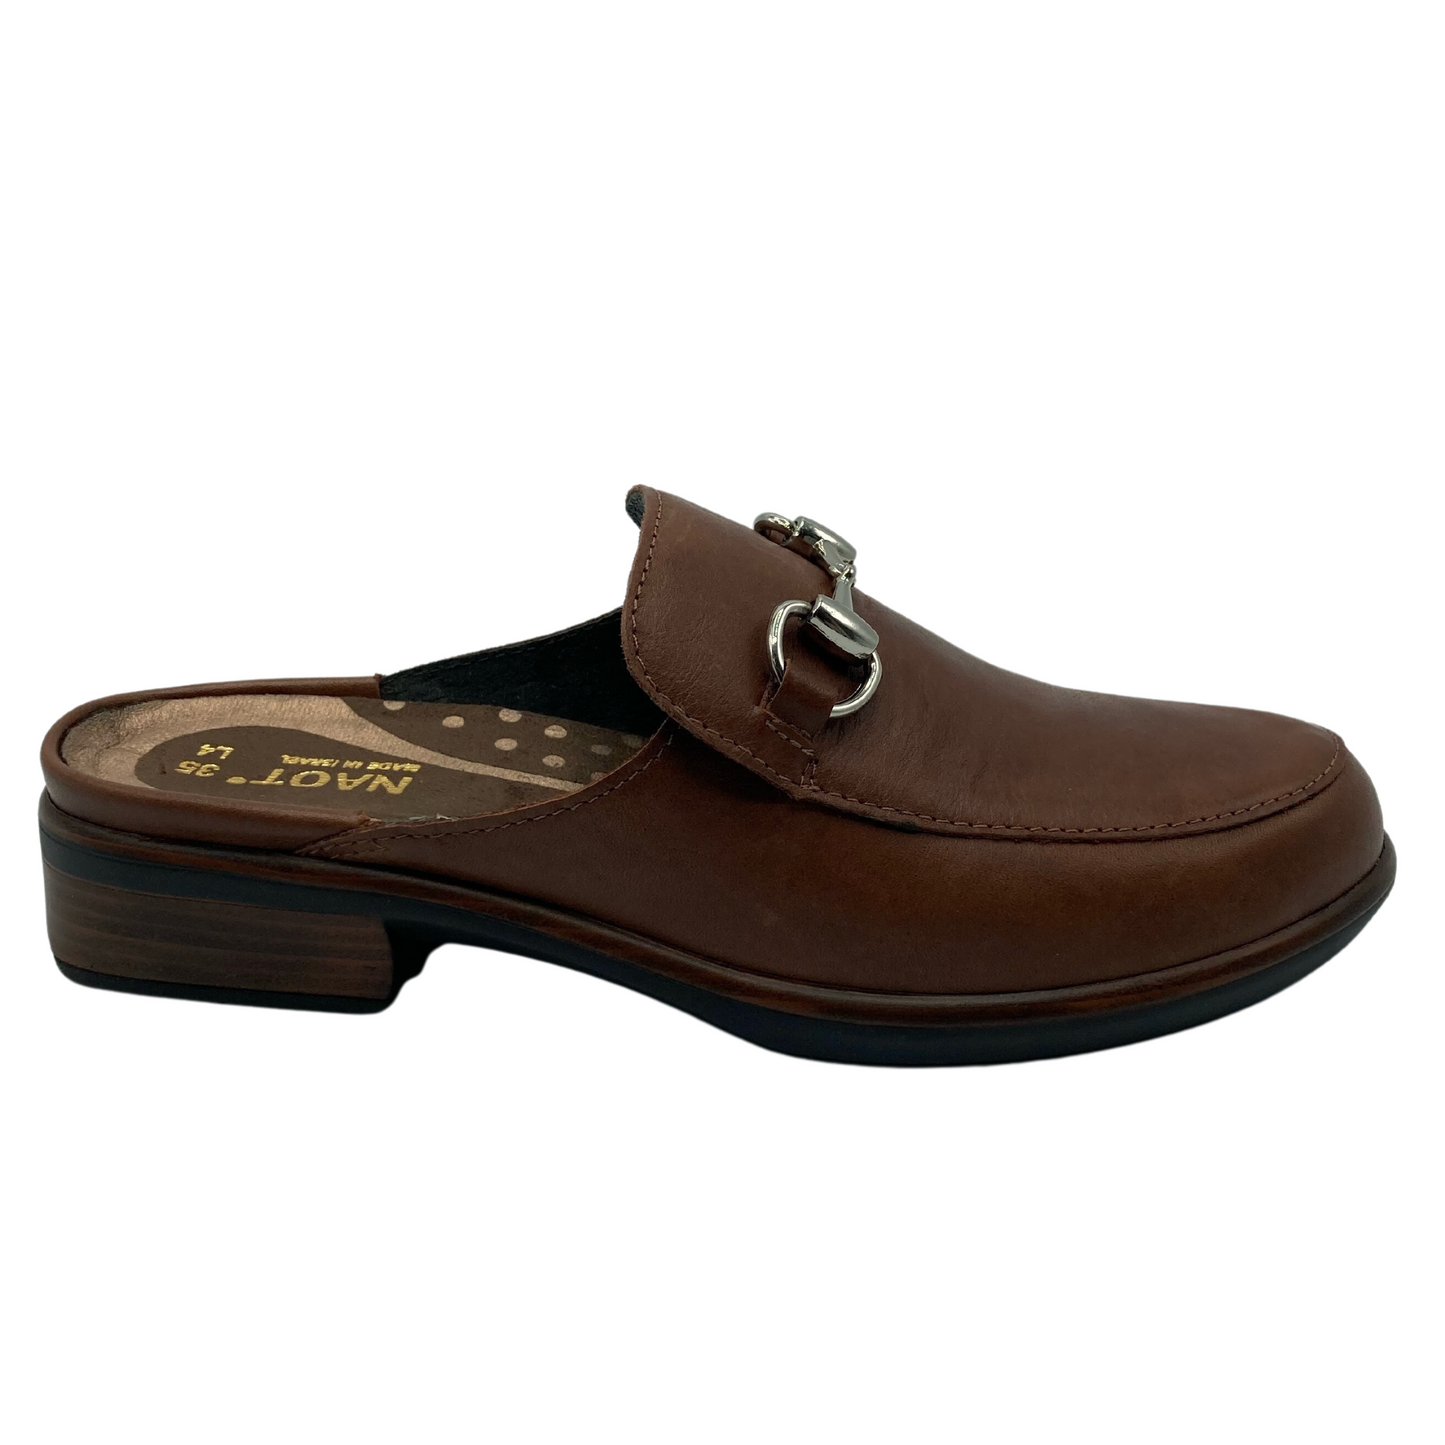 Right facing view of brown leather slide loafer with block heel and silver bit detail on upper